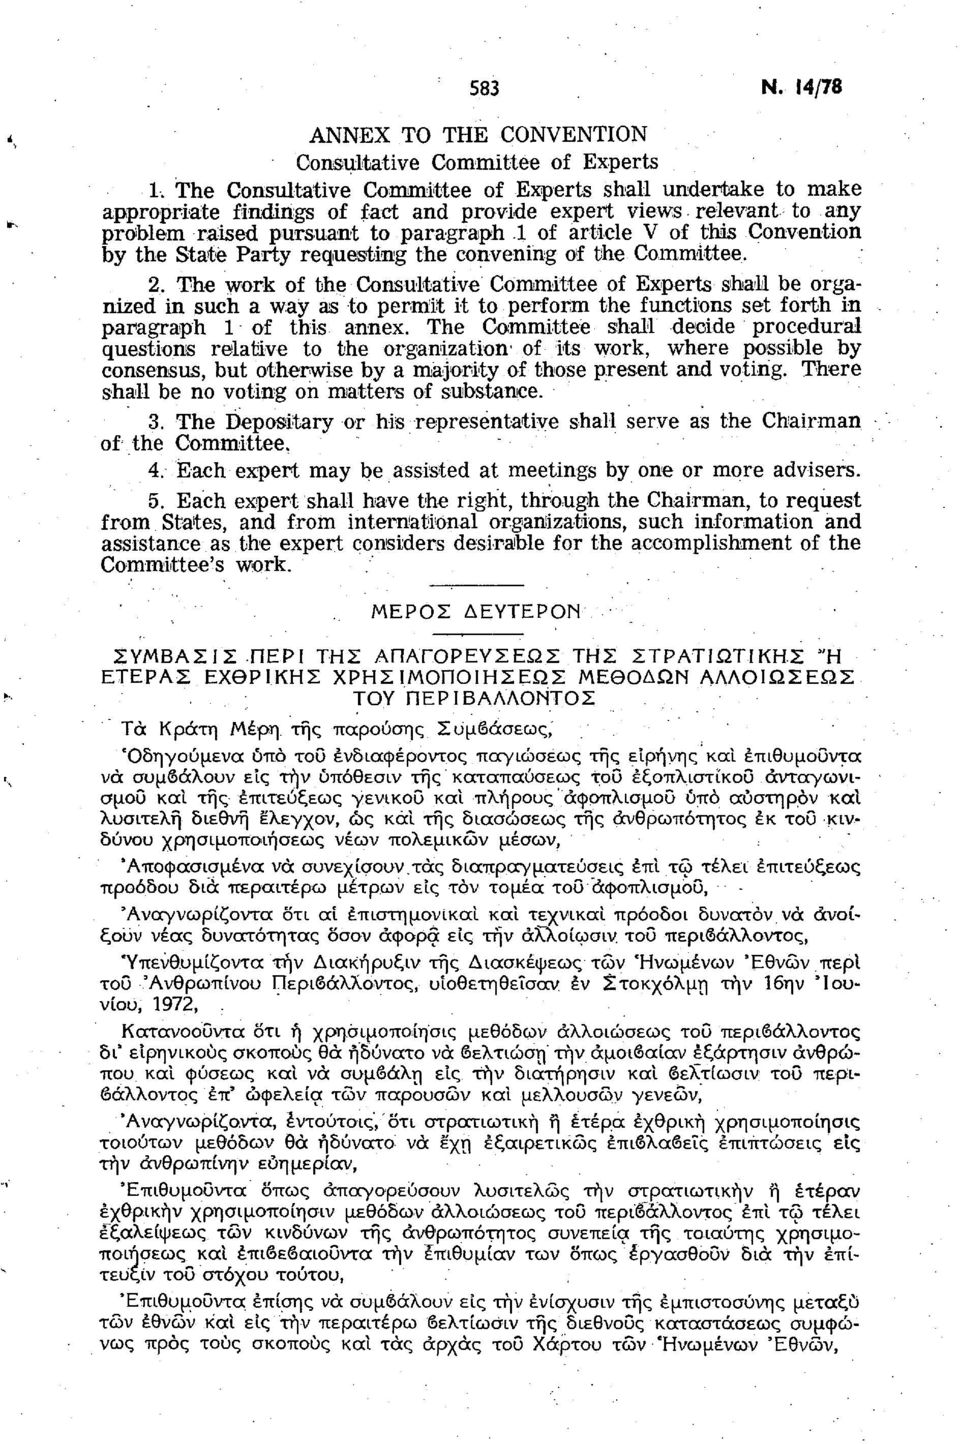 Convention by the State Party requesting the convening of the Committee. 2.